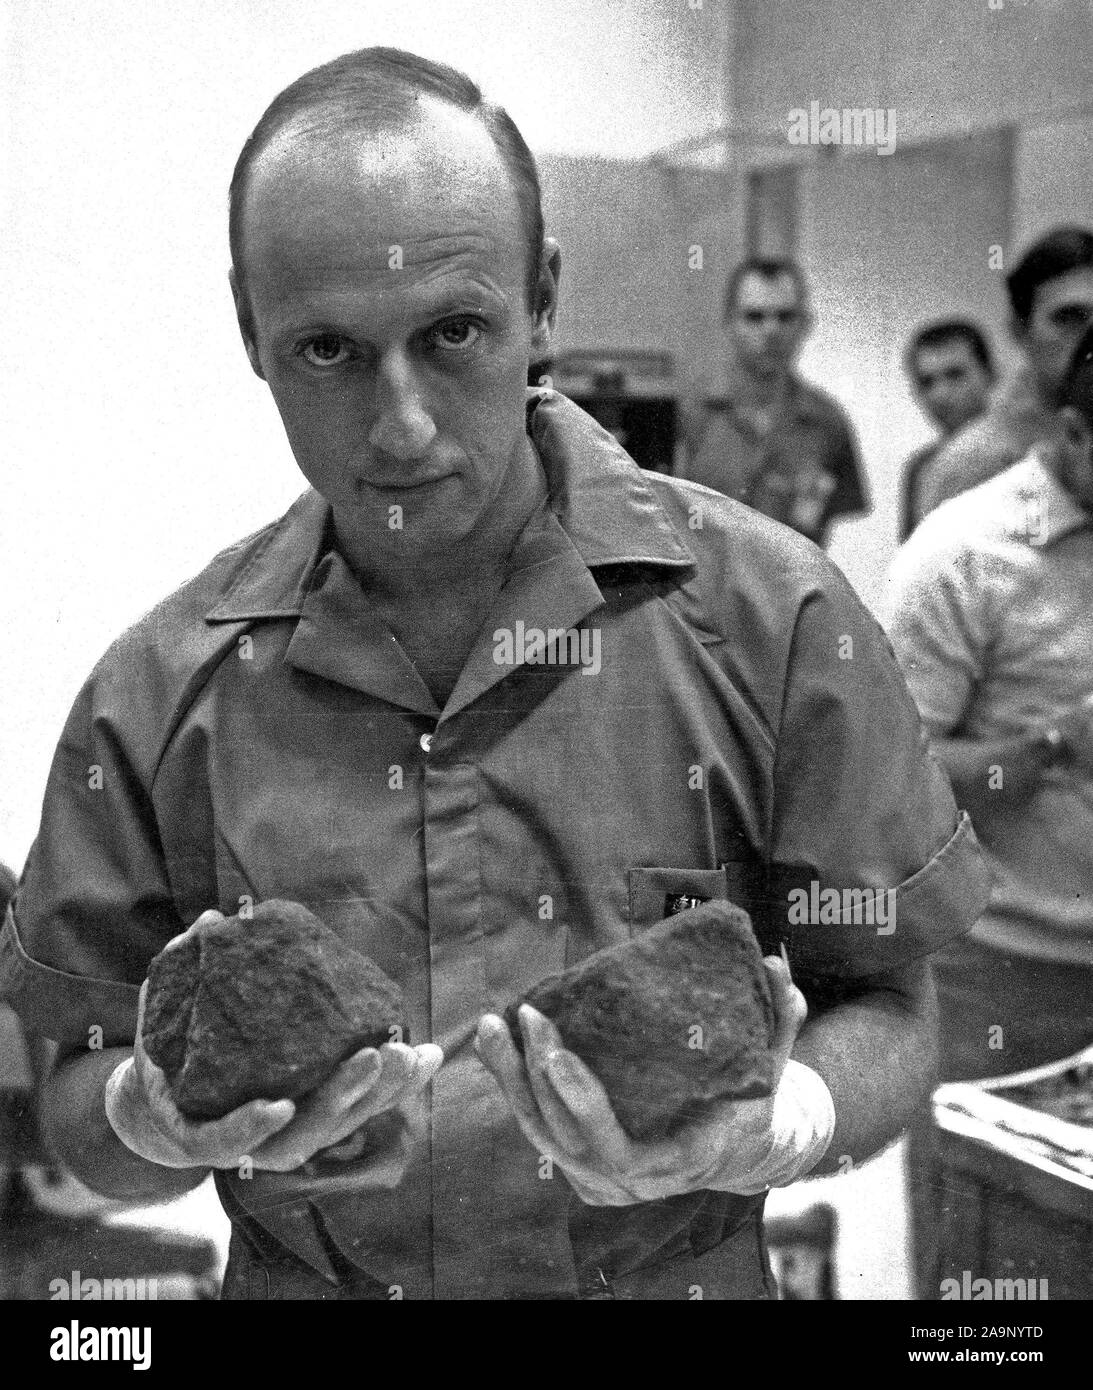 (29 Nov. 1969) --- Astronaut Charles Conrad Jr., commander of the Apollo 12 lunar landing mission, holds two lunar rocks which were among the samples brought back from the moon by the Apollo 12 astronauts. Stock Photo